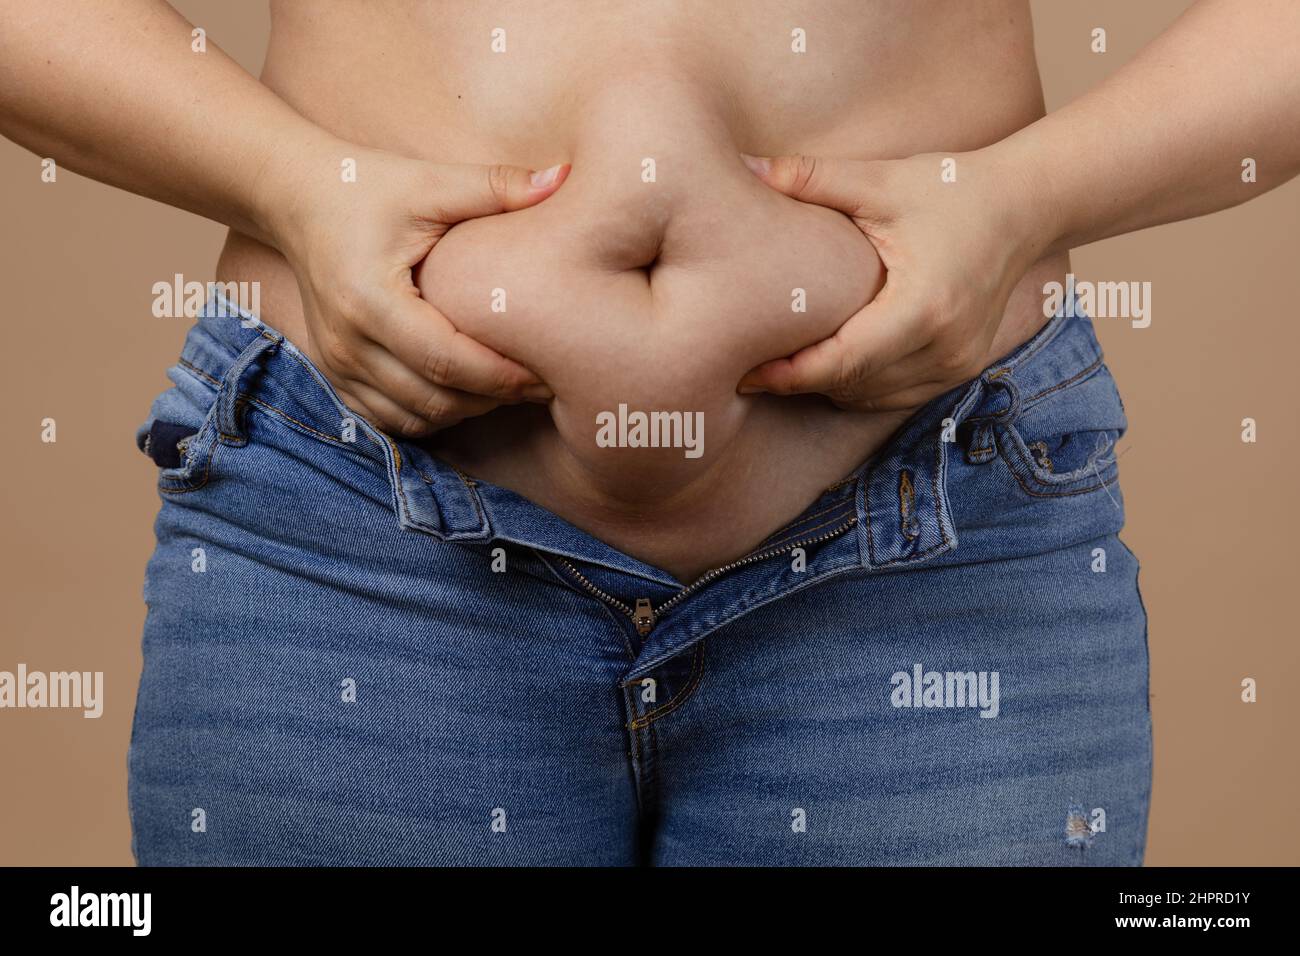 Woman squeezing showing fat sagging tummy in blue unzipped jeans on beige background. Sudden weight gain. Visceral fat. Body positive. Tight little Stock Photo